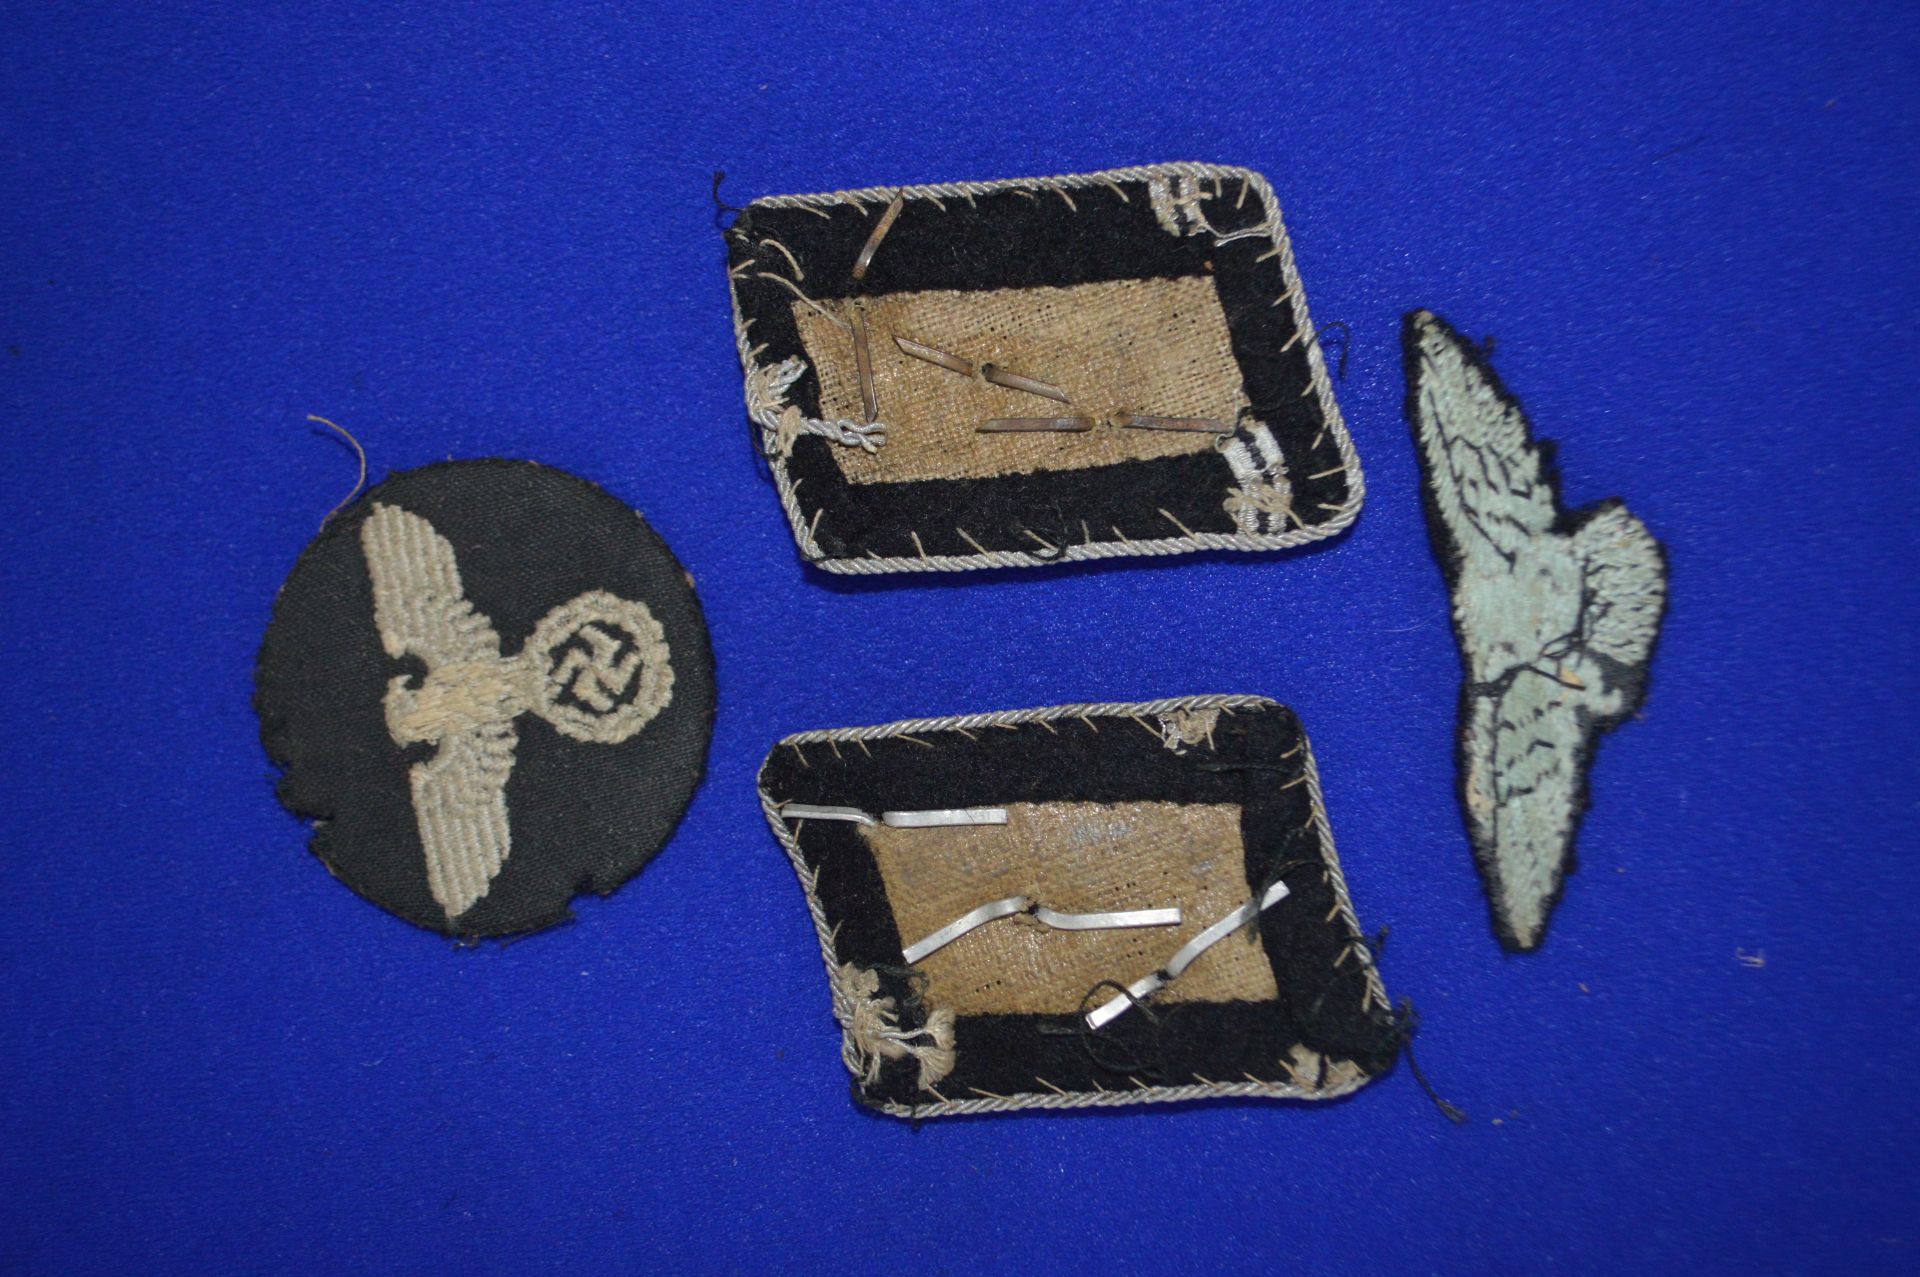 Military Medals, Badges, Kit Bags, and Assorted Items Including a German Belt - Image 11 of 13